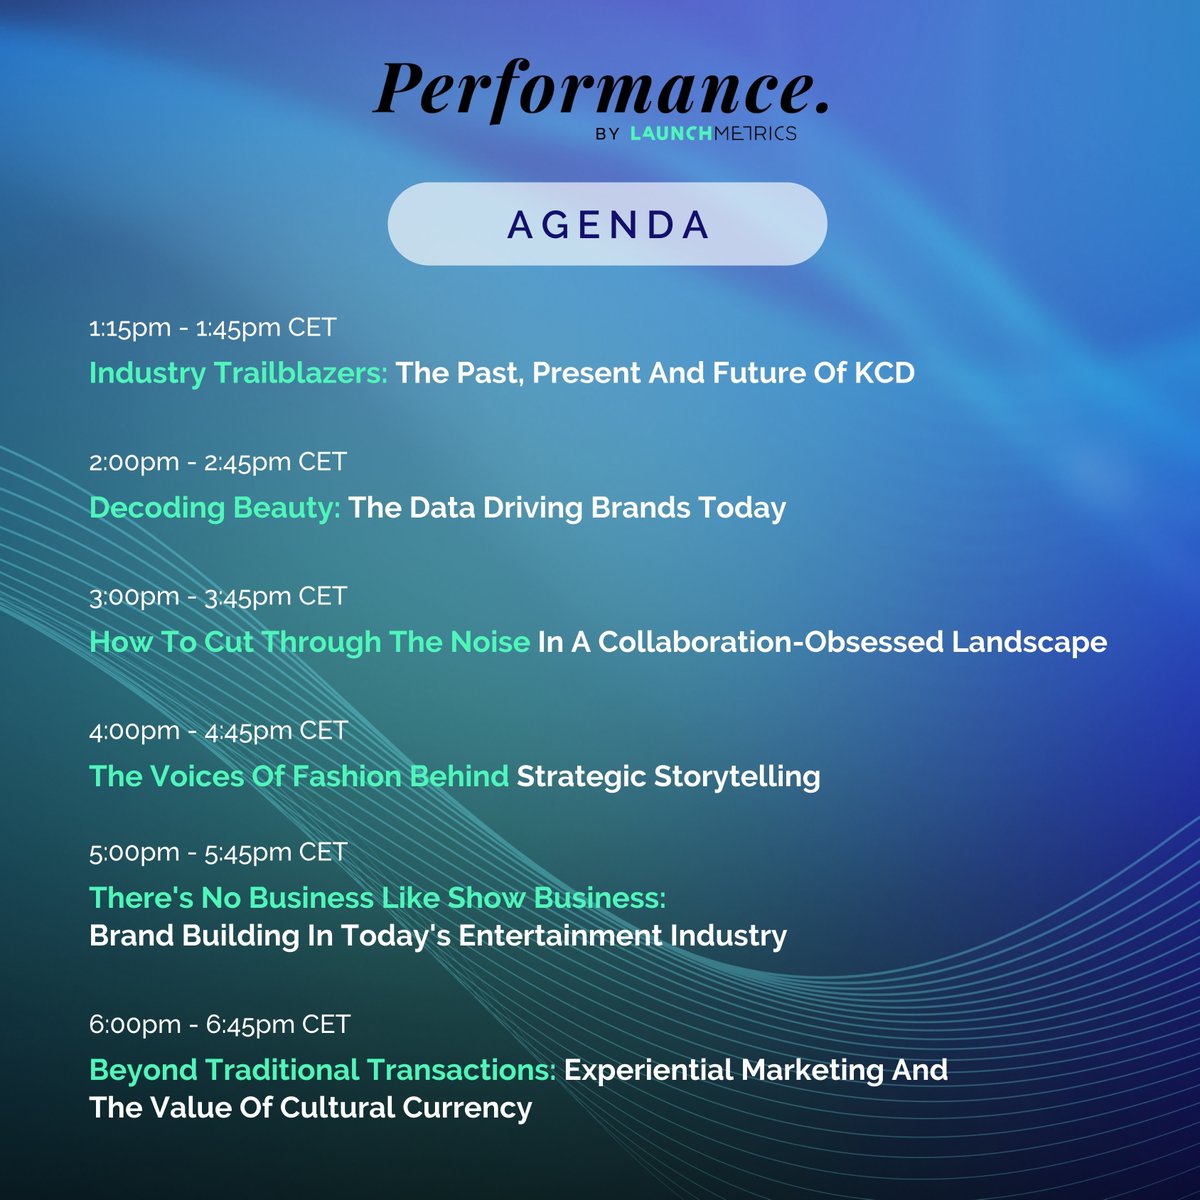 Join @Launchmetrics and IMG Focus for Performance Summit, the industry-renowned virtual event on brand performance. Hear insight from IMG Focus, Jason Wu and more - secure your spot today to connect with the industry’s leading executives 🔗 tinyurl.com/33tnhxdx